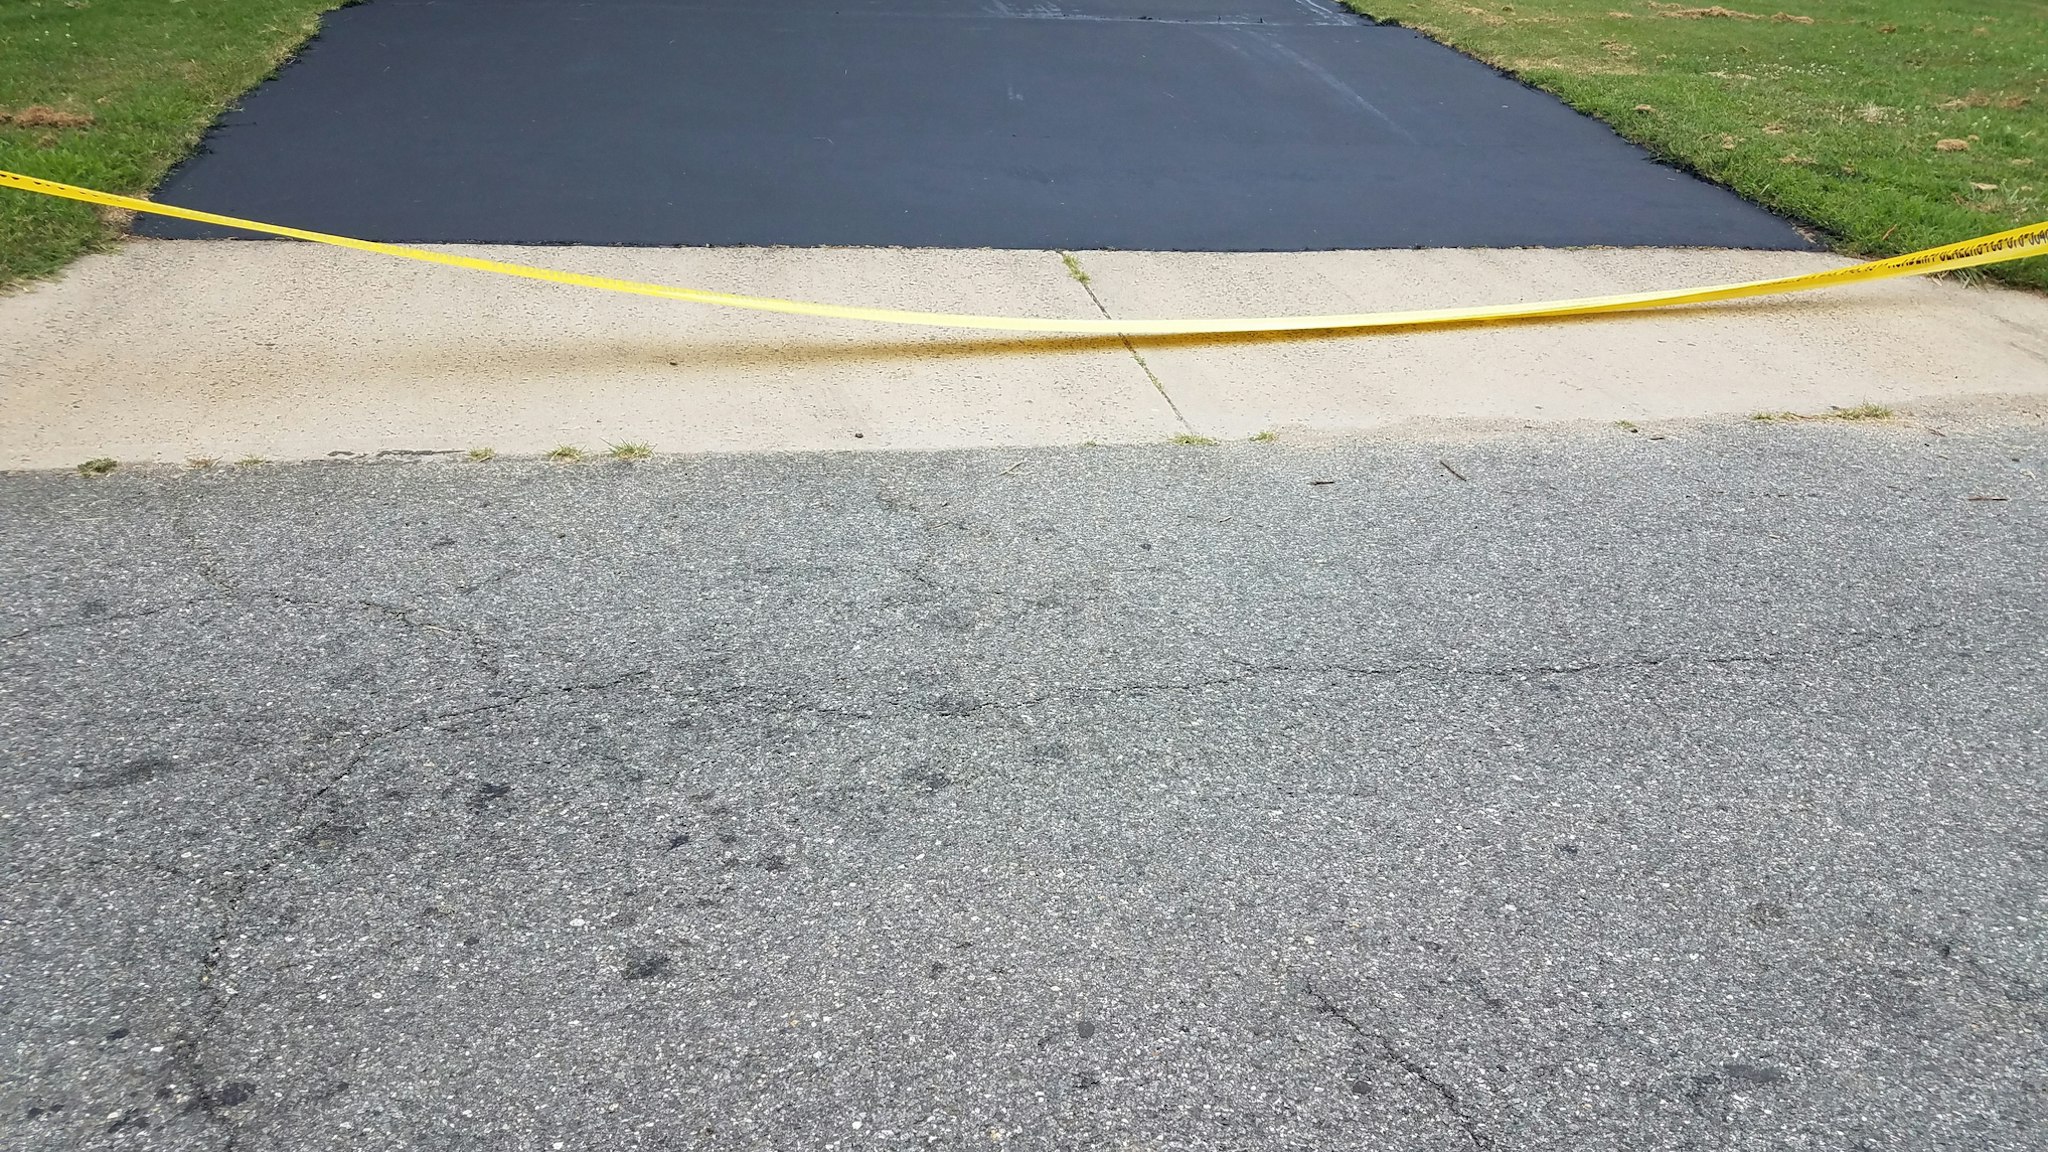 New asphalt driveway and yellow caution tape - stock photo